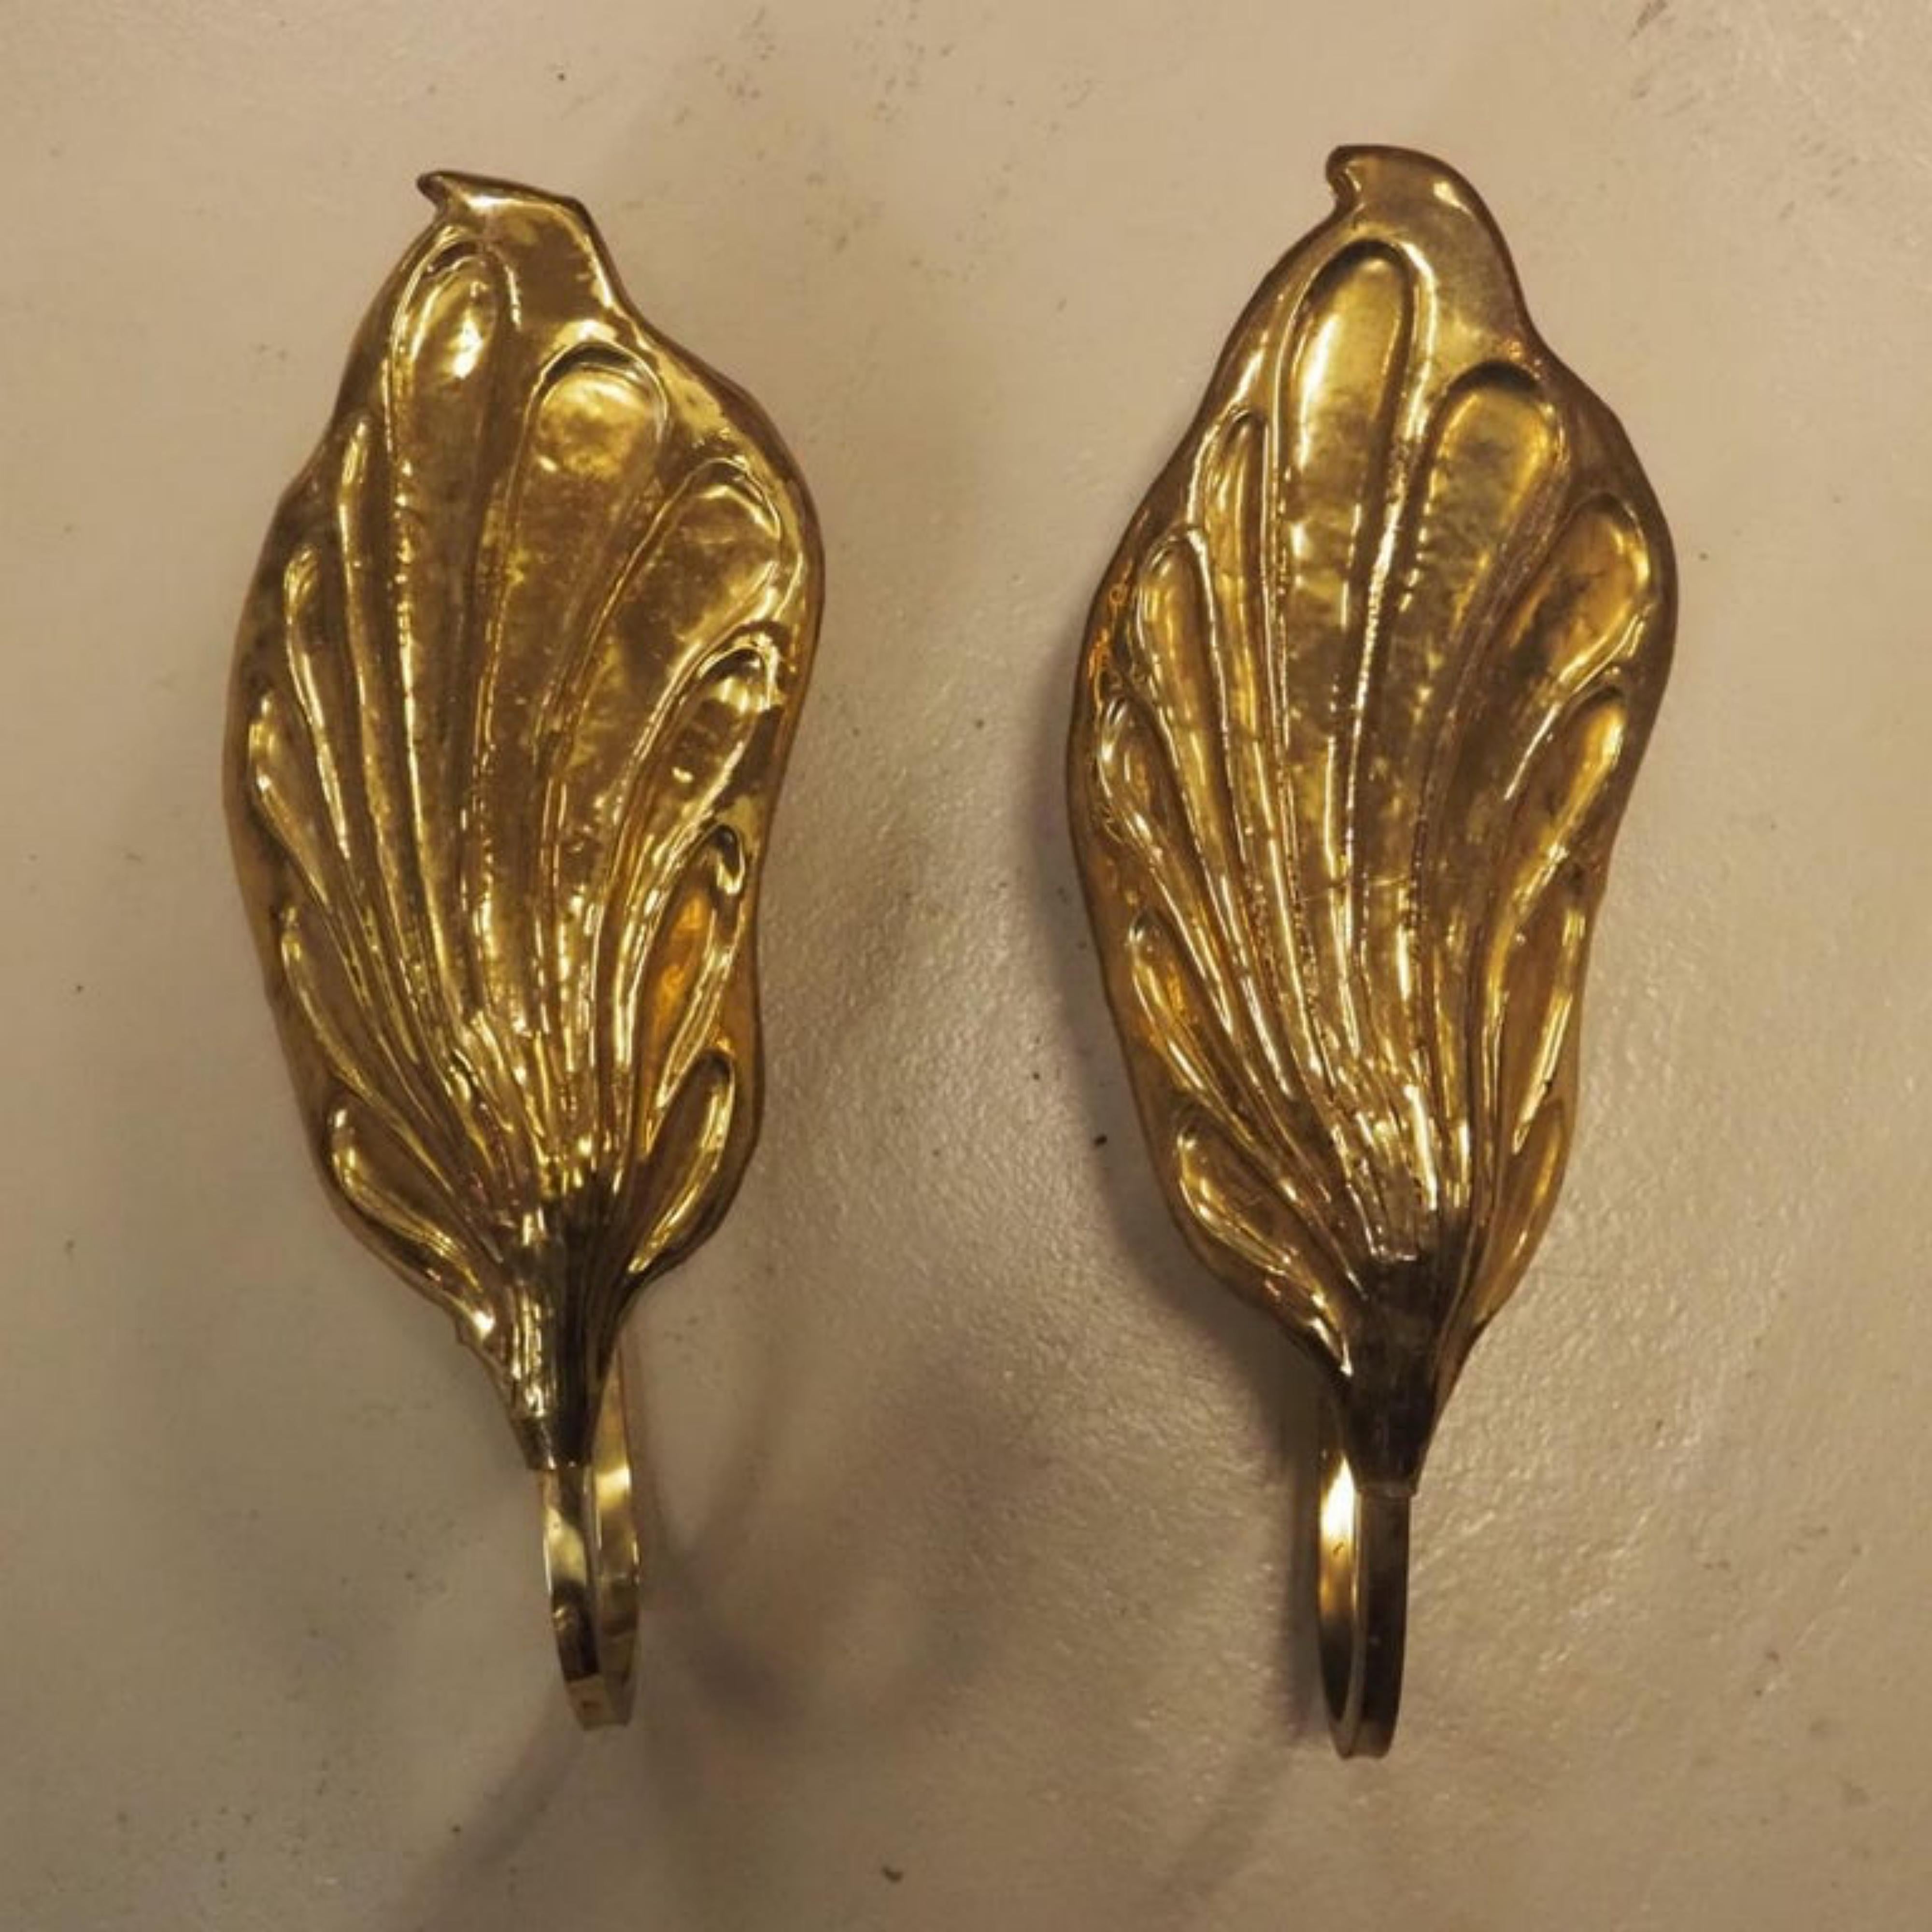 Tommaso Barbi / Carlo Giorgi
Set of two lovely Mid-Century Modern brass 'Leaf' wall lamps or sconces. Designed by Carlo Giorgi for Bottega Gadda, 1970s, Italy. 
Pair of Sconces circa 1970, model 